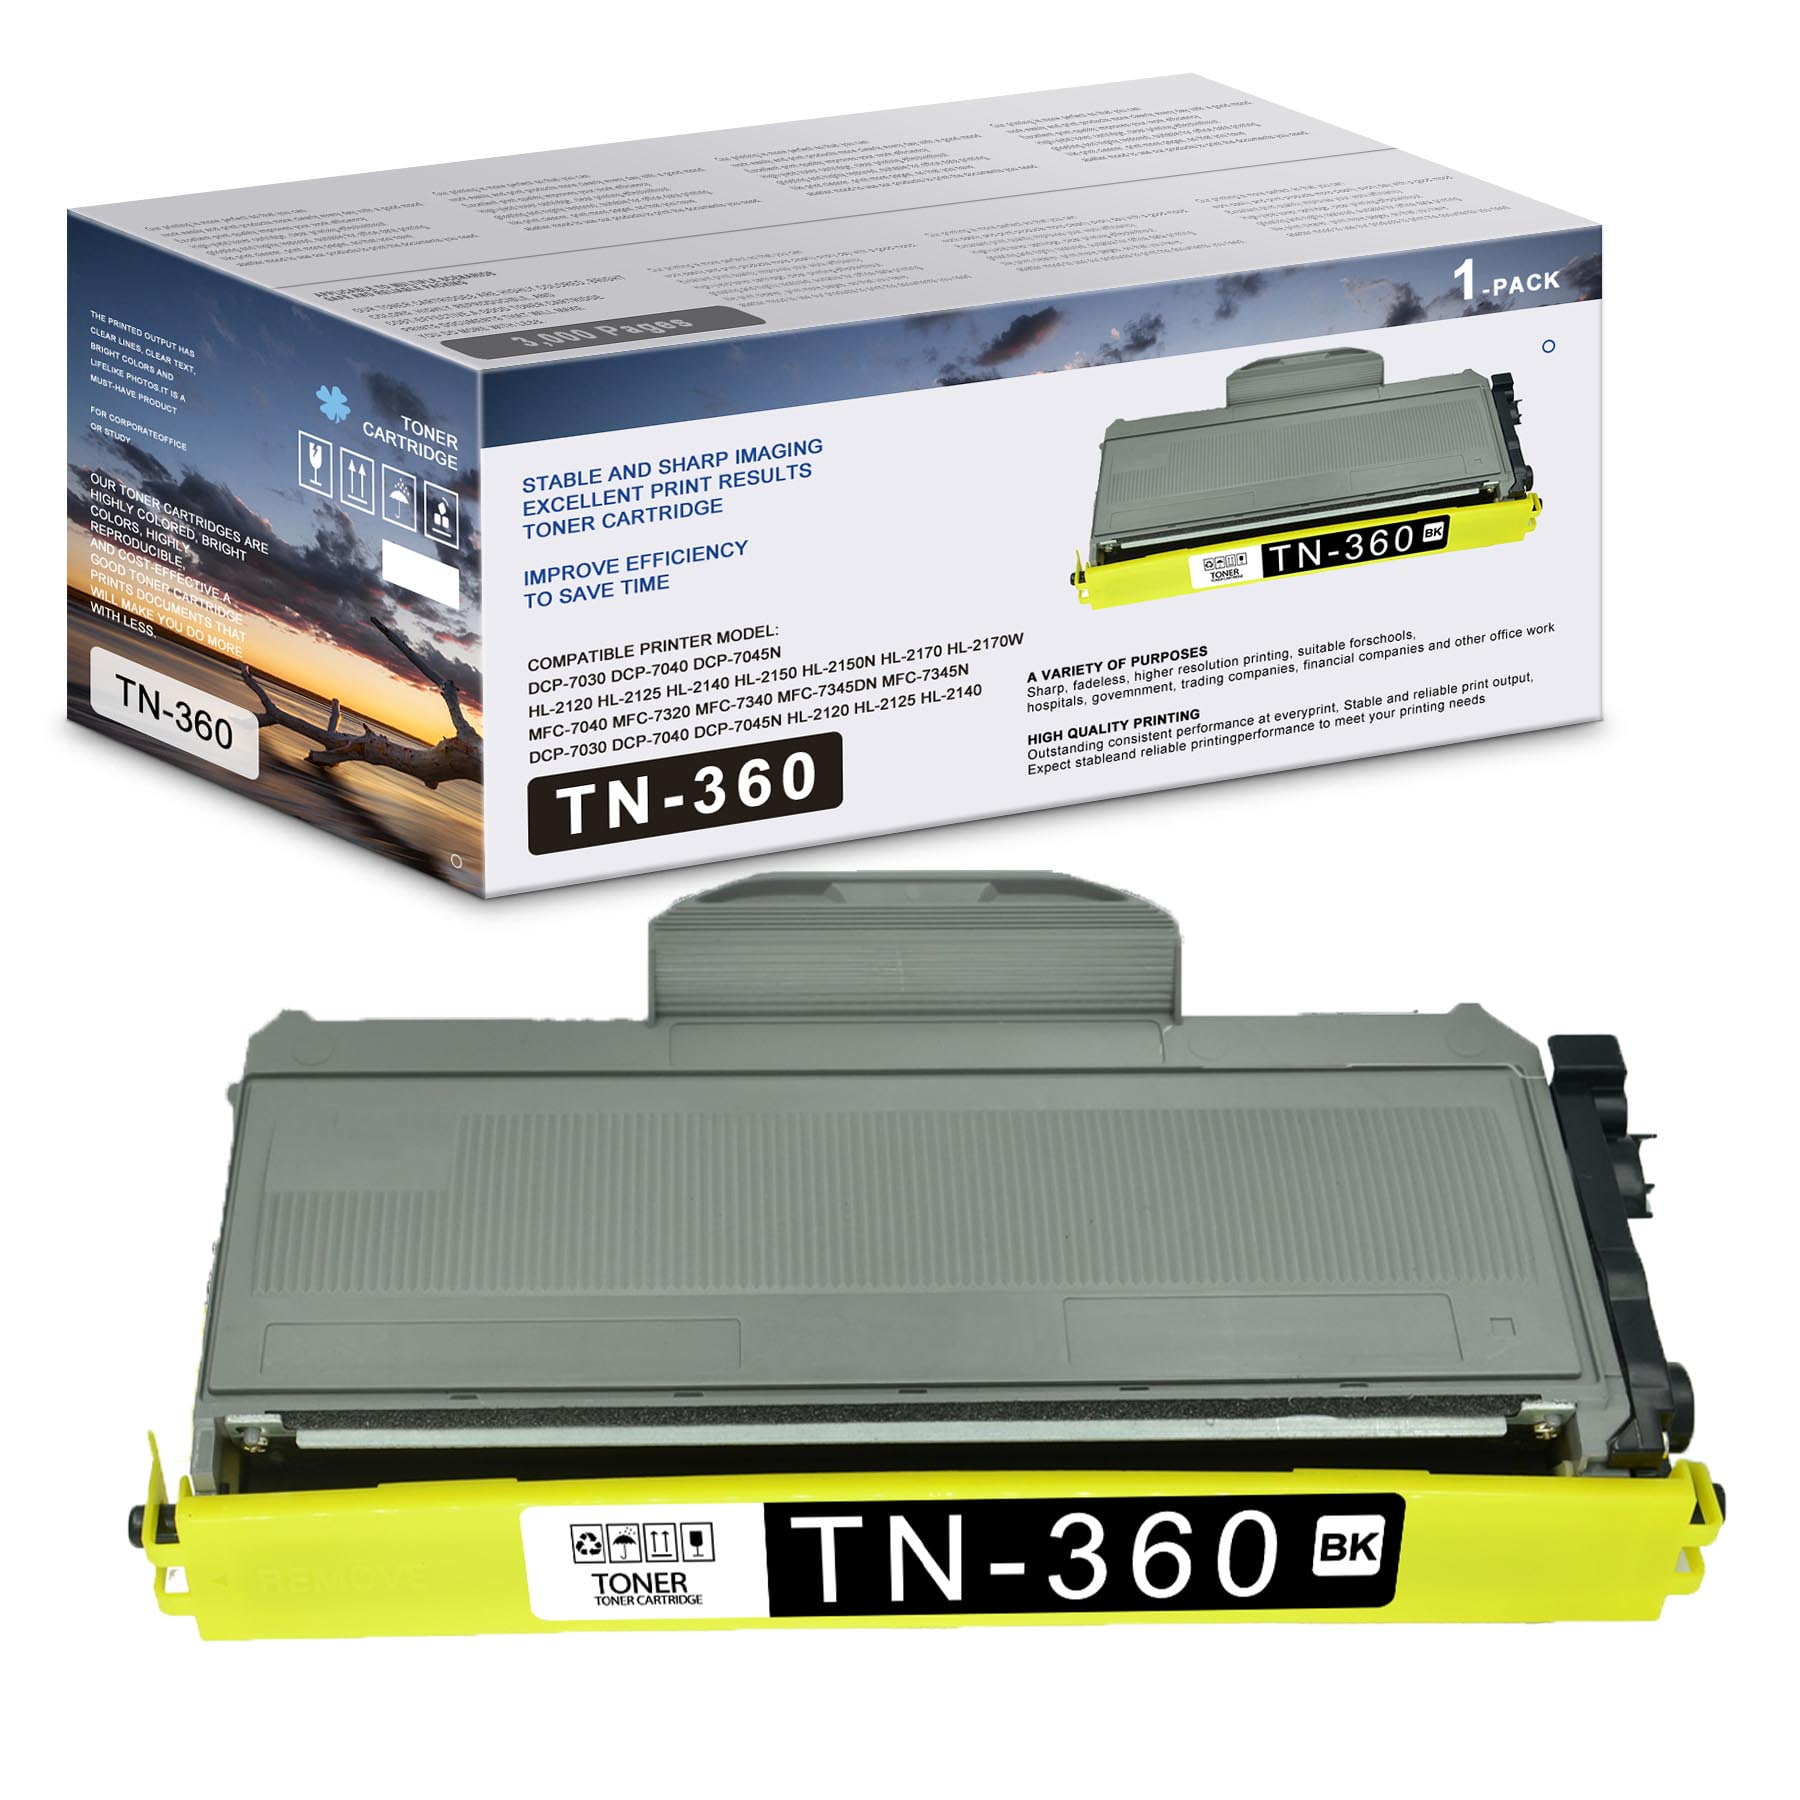 vasteland kiem Ananiver TN360 Compatible Toner Cartridge Replacement for Brother TN330 TN360 TN-330  TN-360 High Yield DCP-7040 DCP-7030 MFC-7840W MFC-7440N MFC-7345N MFC-7340  HL-2170W HL-2140 1 Packs - Walmart.com